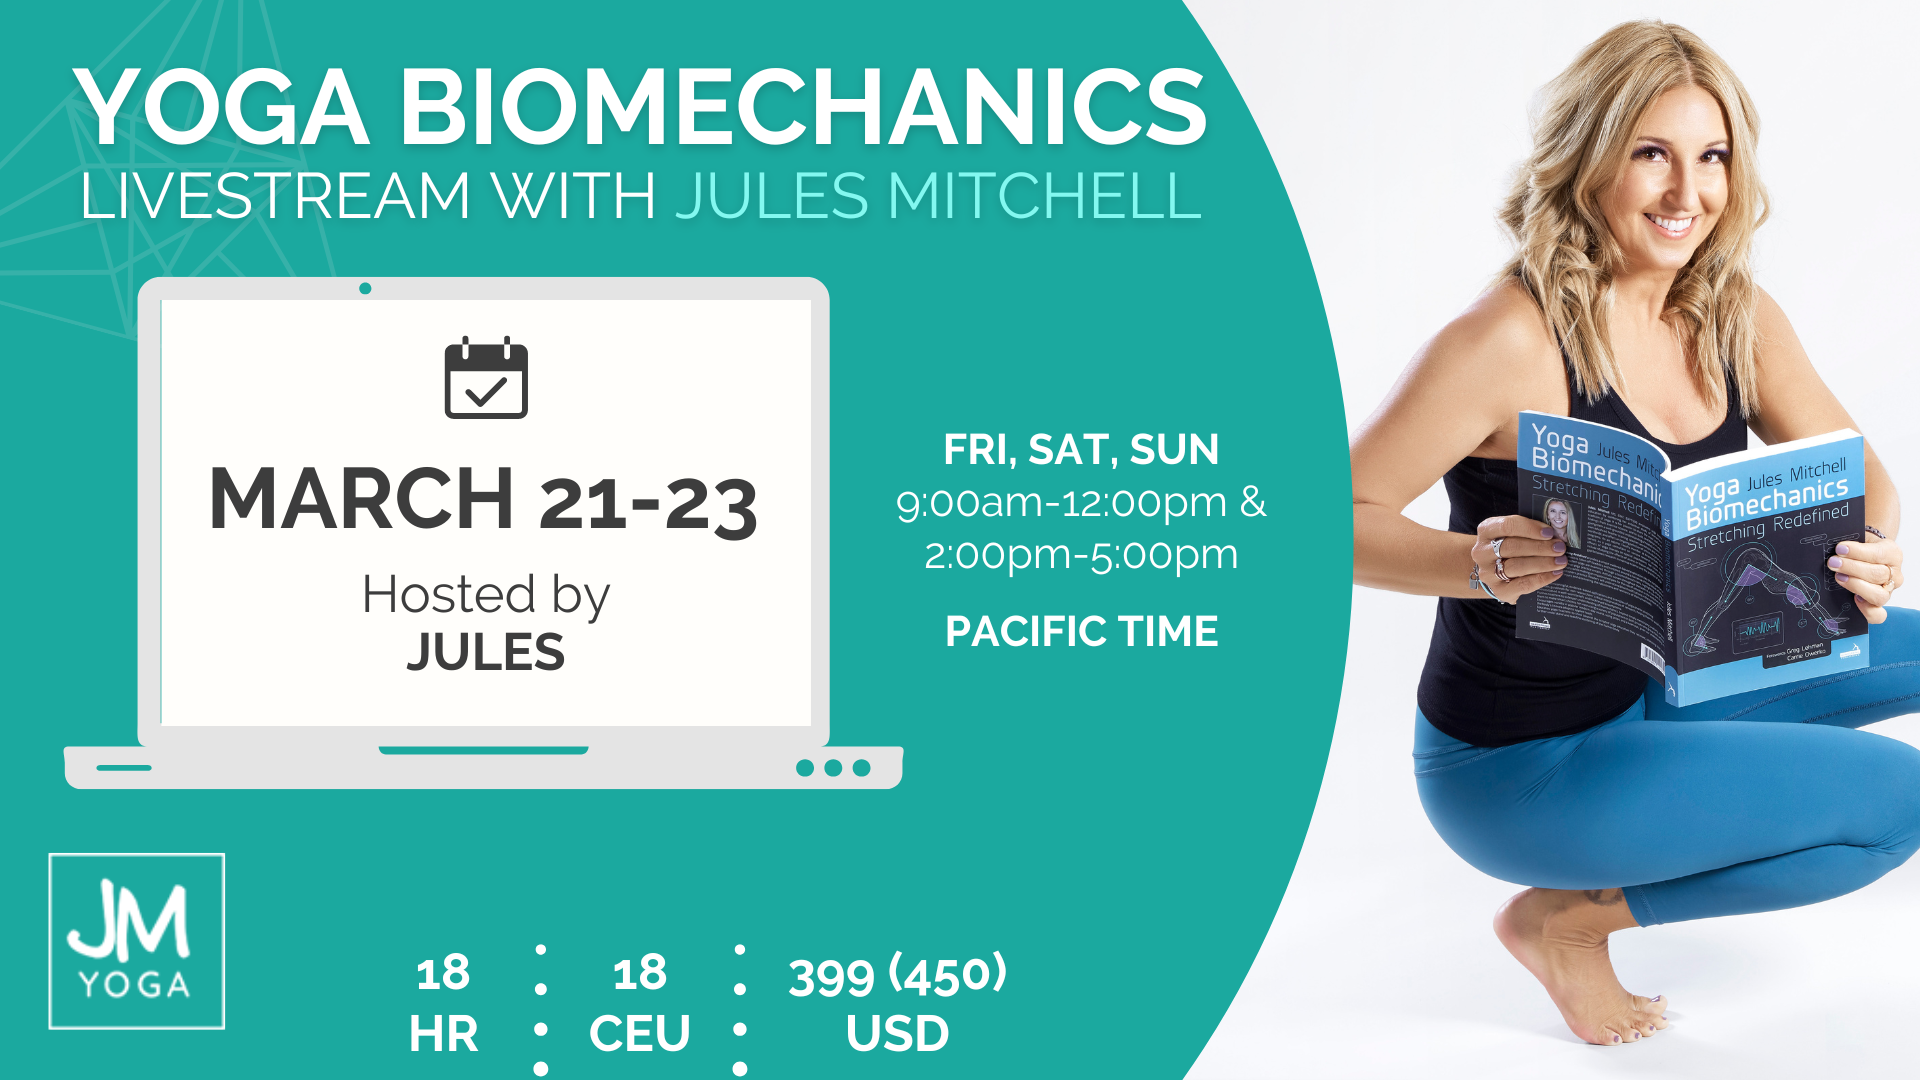 Jules Mitchell teaches Yoga Biomechanics online - a 3-day livestream course for yoga teachers curious about biomechanics, stretching, and anatomy